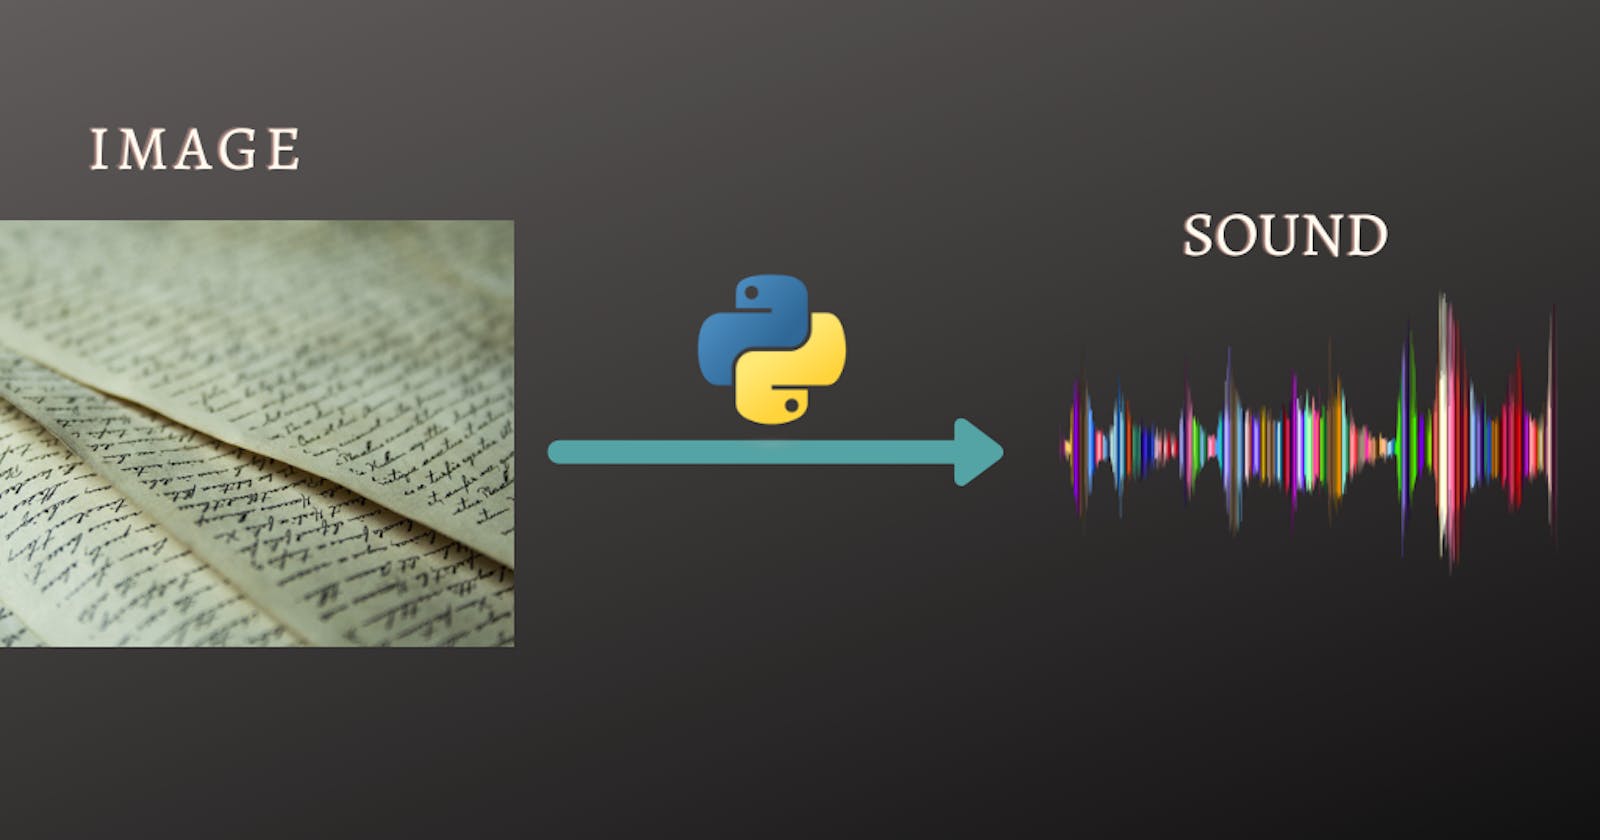 How to convert image to sound in Python